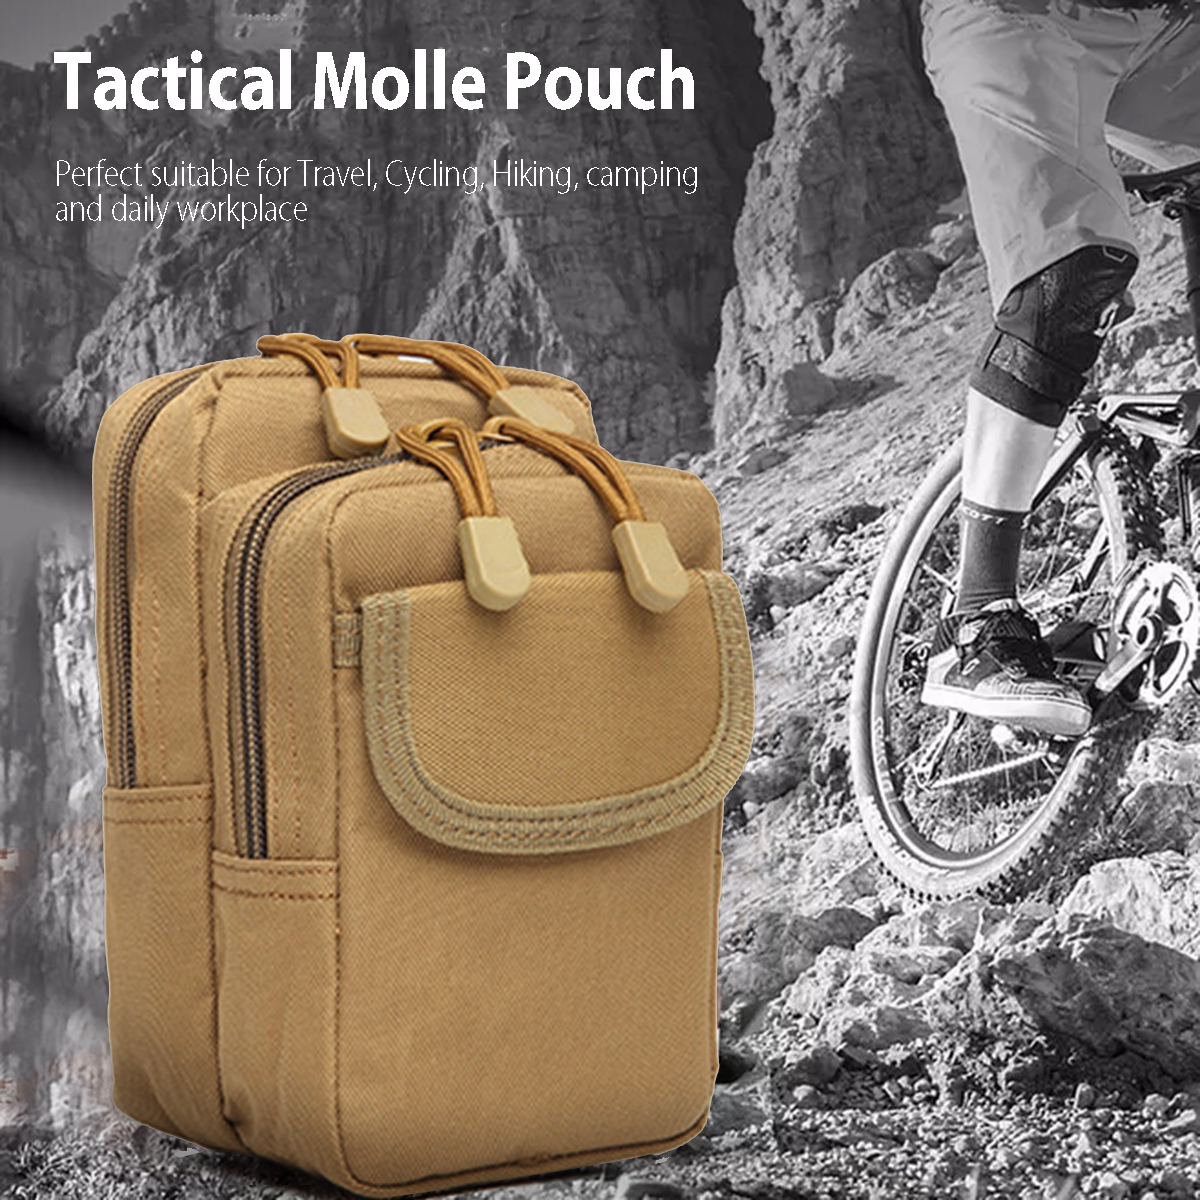 6-Inch-Tactical-Molle-Pouch-Waist-Bag-Phone-Bag-For-Outdoor-Sports-Hiking-Climbing-1524899-1